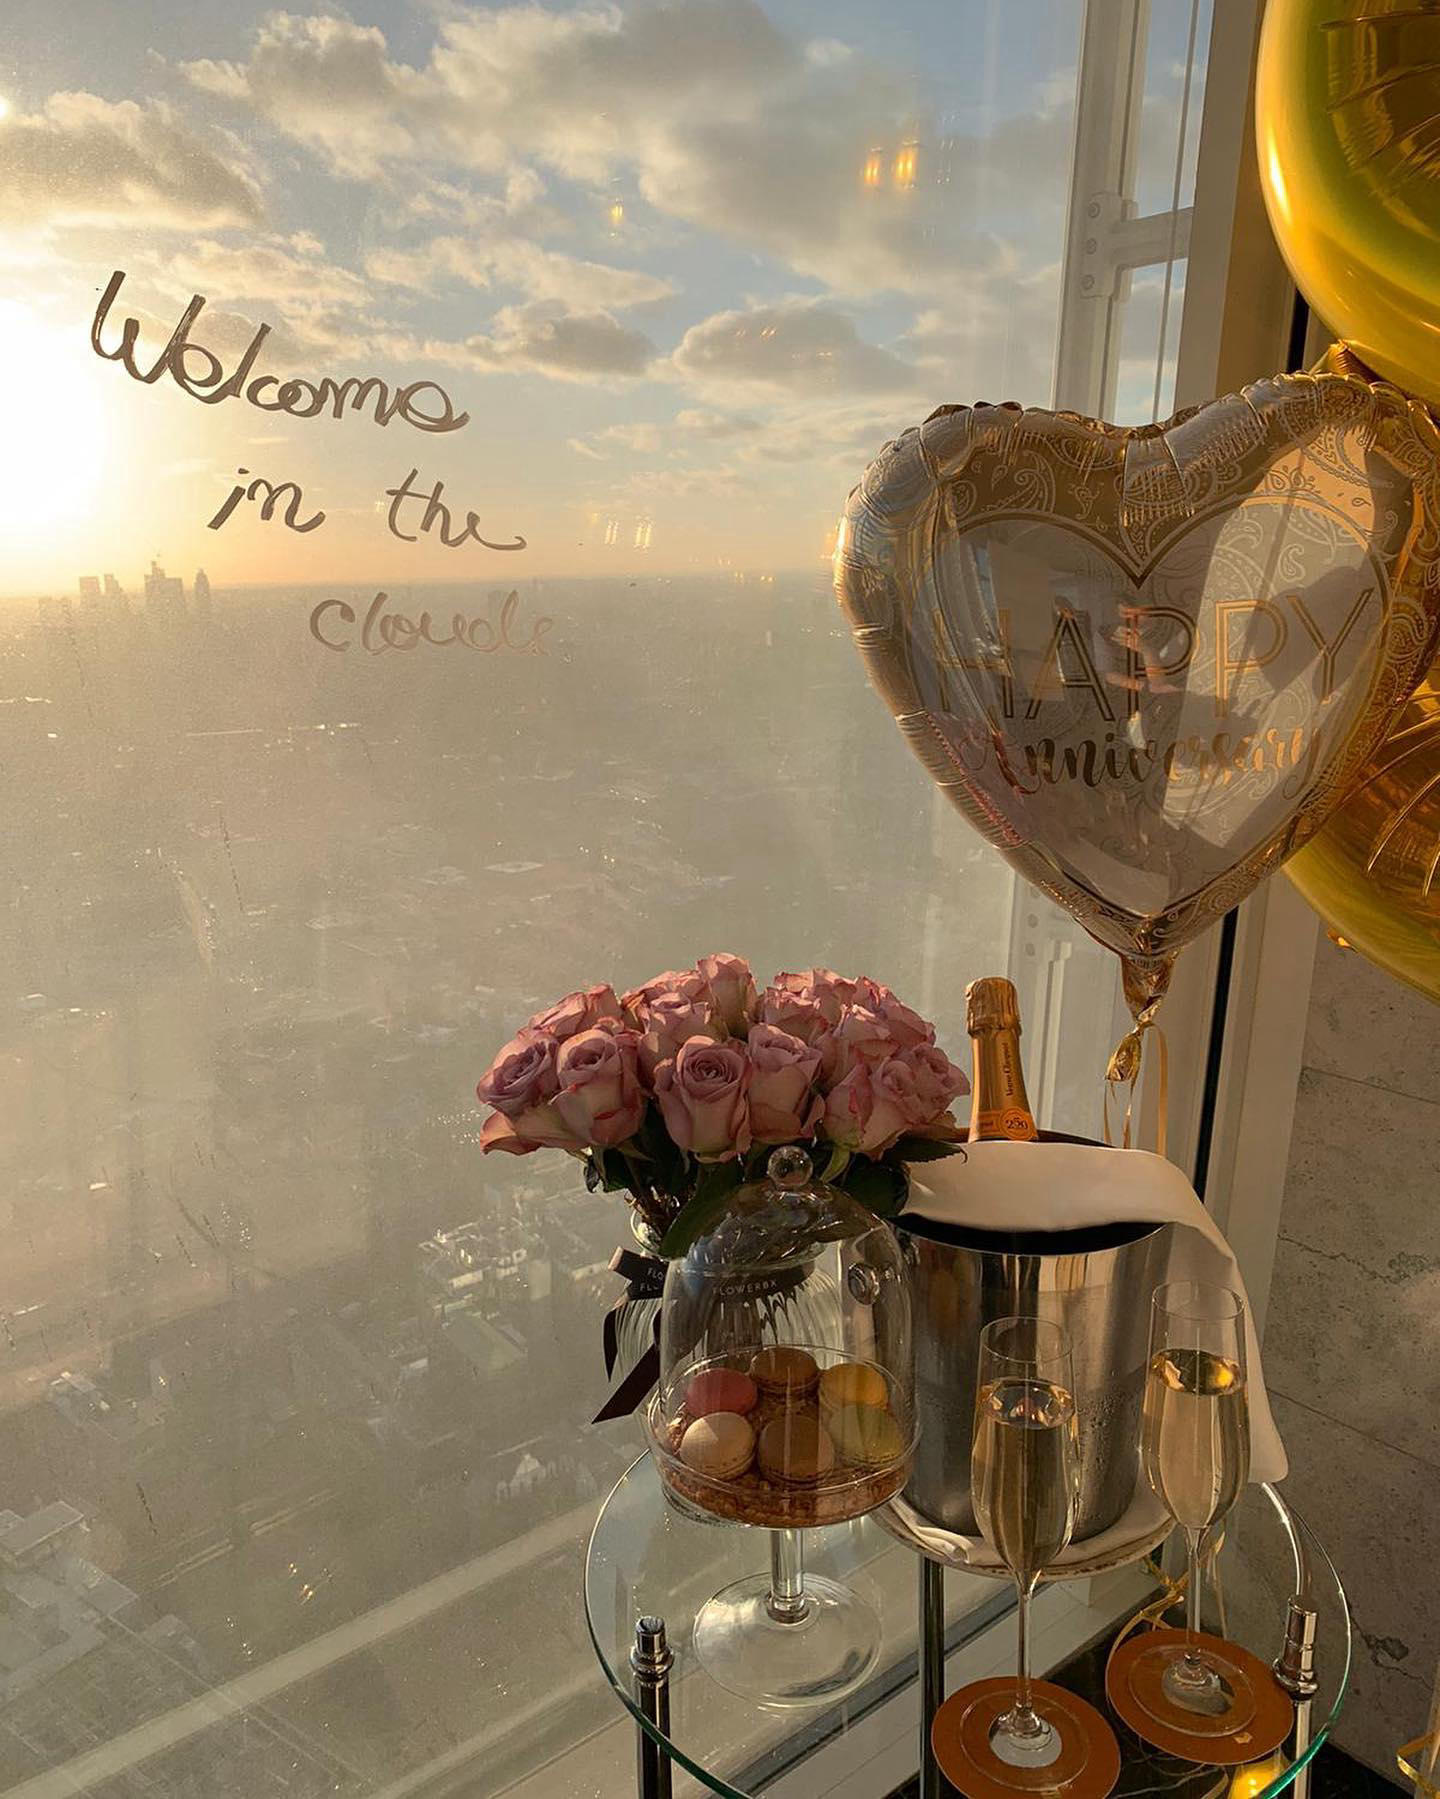 With romance budding as Valentine’s Weekend approaches, Shangri-La The Shard, London is offering new